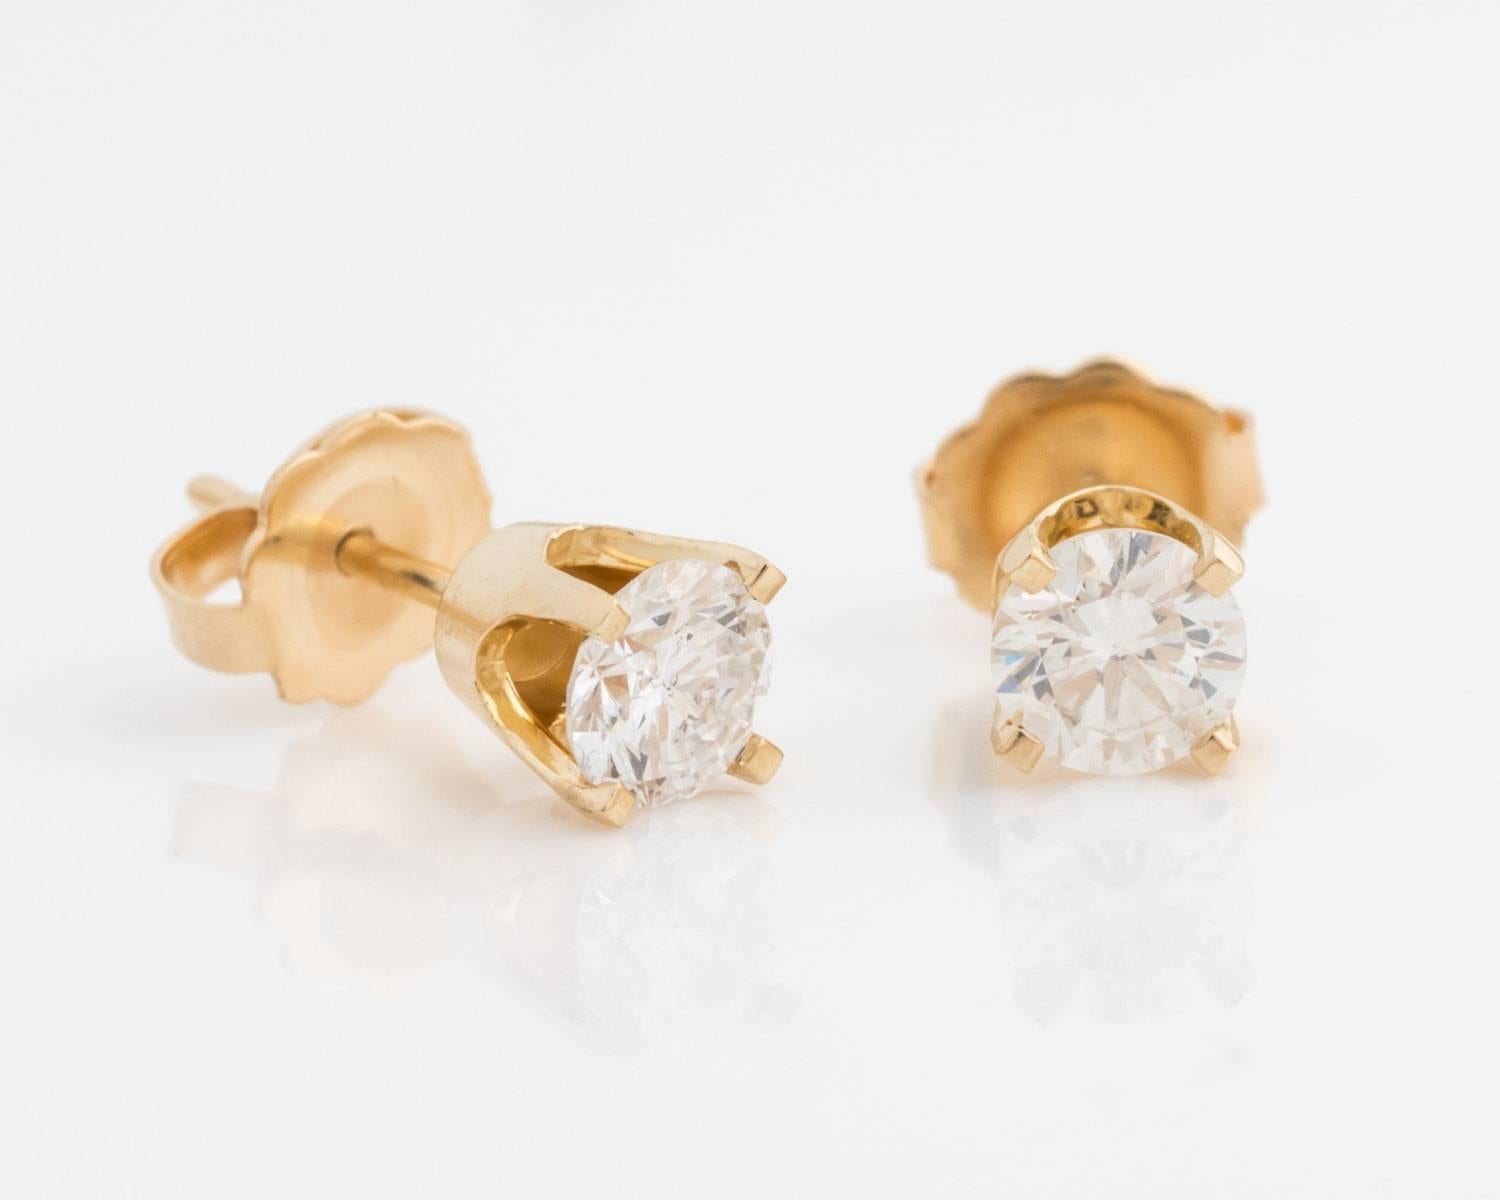 0.65 carats Diamond and 14K Yellow Gold Earrings. The diamonds are placed in four-prong frames with a thick gold frame at the bottom of the prongs. The entire diamond cut is visible due to gaps between each prong. Whatever the occasion, these